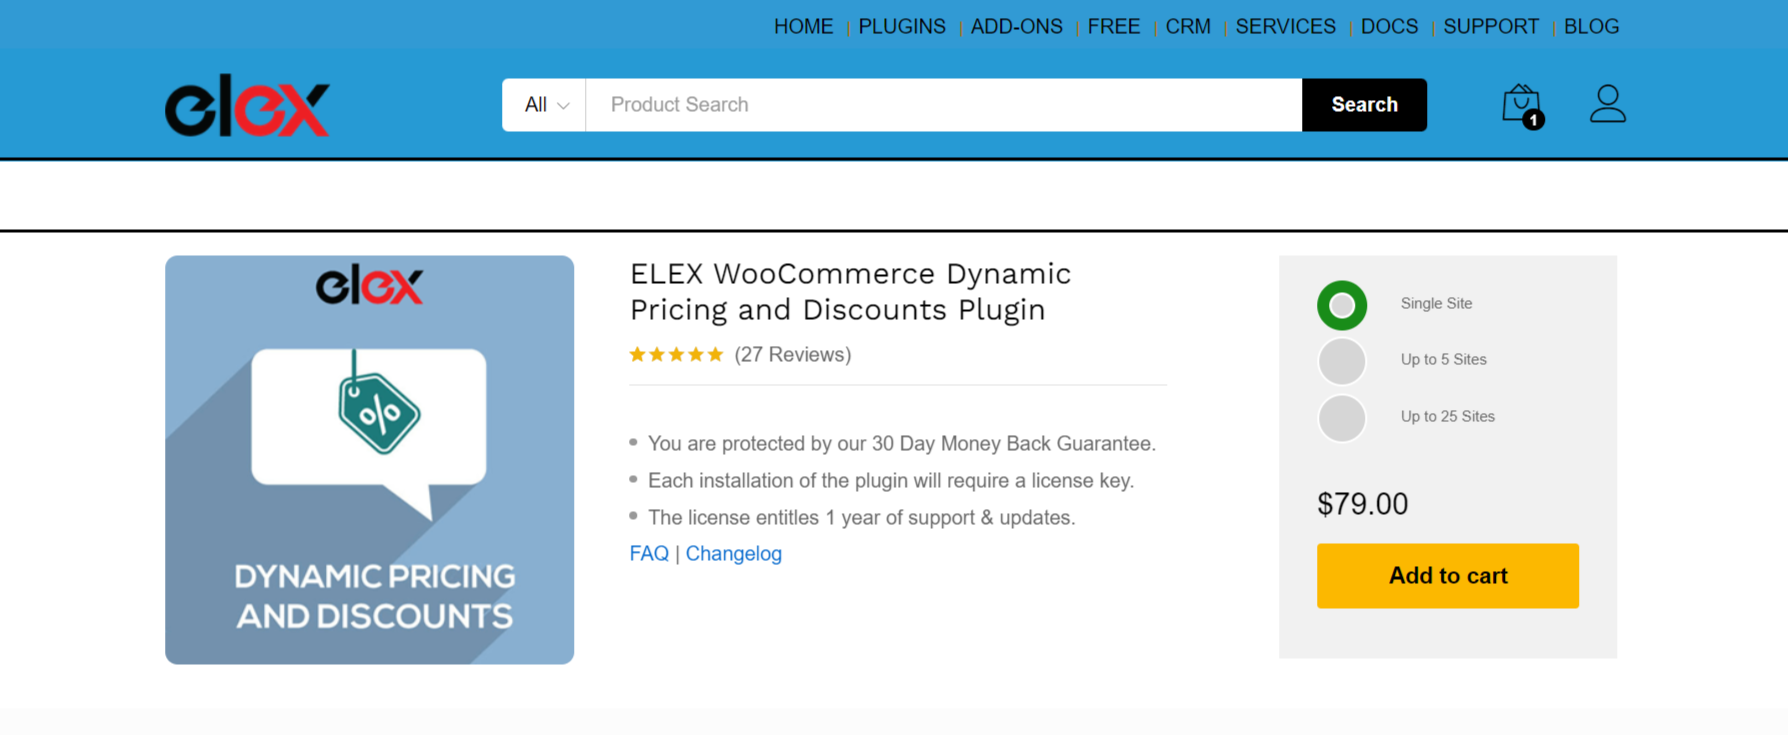 ELEX WooCommerce Dynamic Pricing and Discounts Plugin product page.